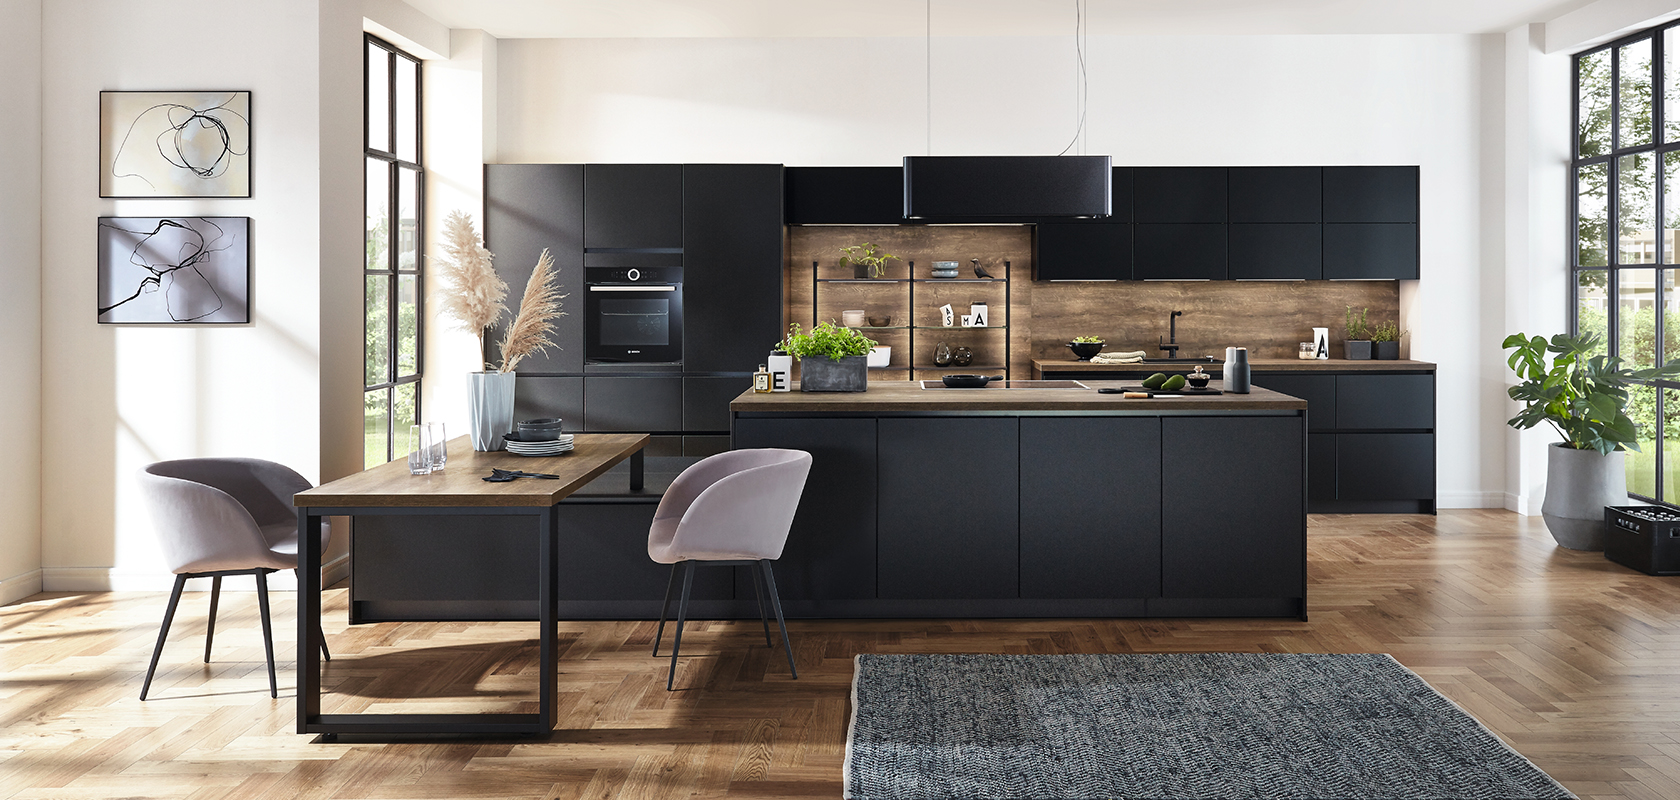 Modern kitchen interior showcasing sleek black cabinetry, wood accents, and a spacious island complemented by natural light from large windows.